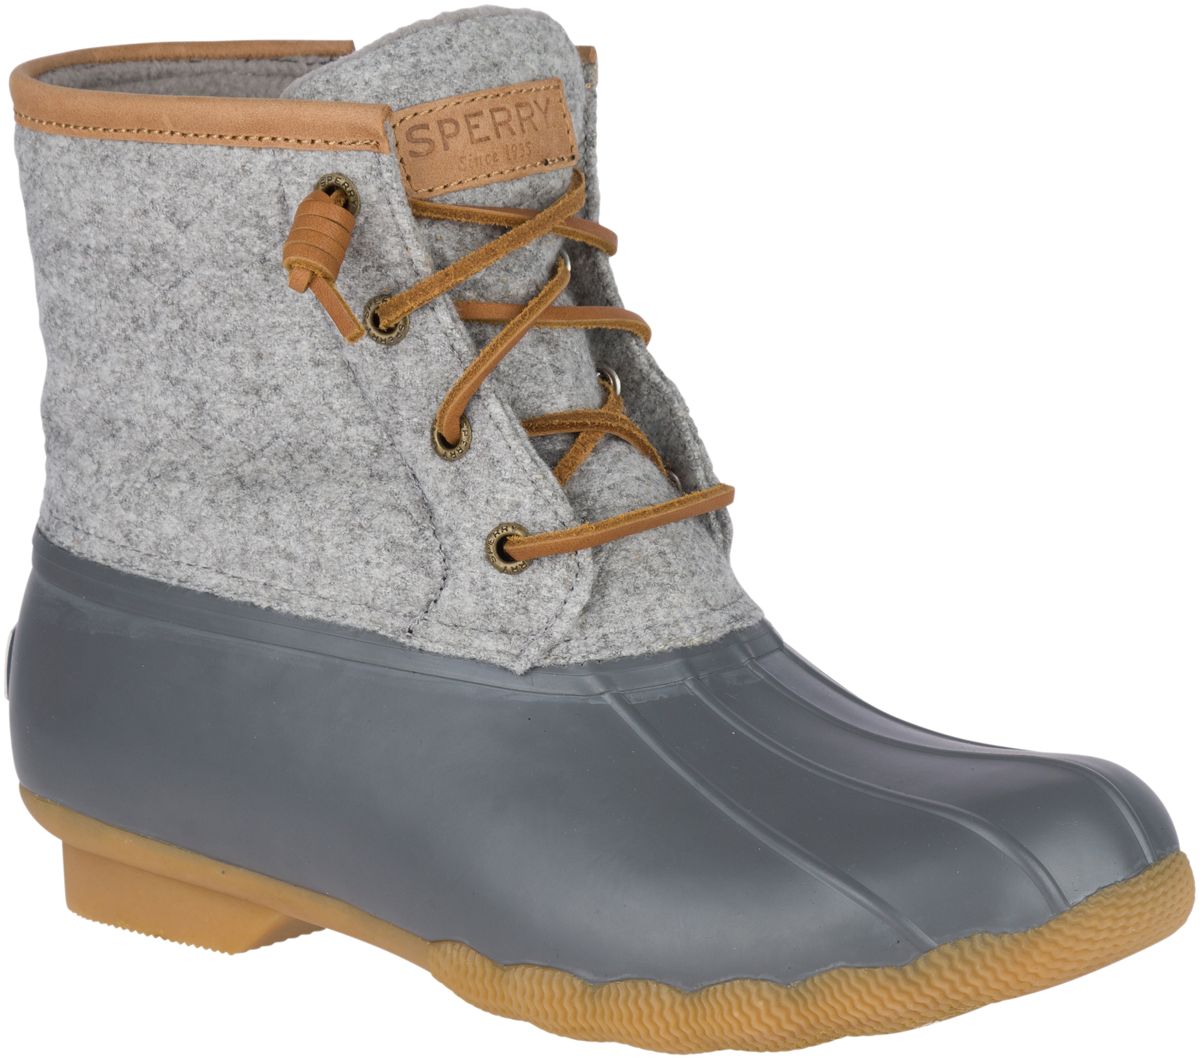 sperry top sider wool duck boot